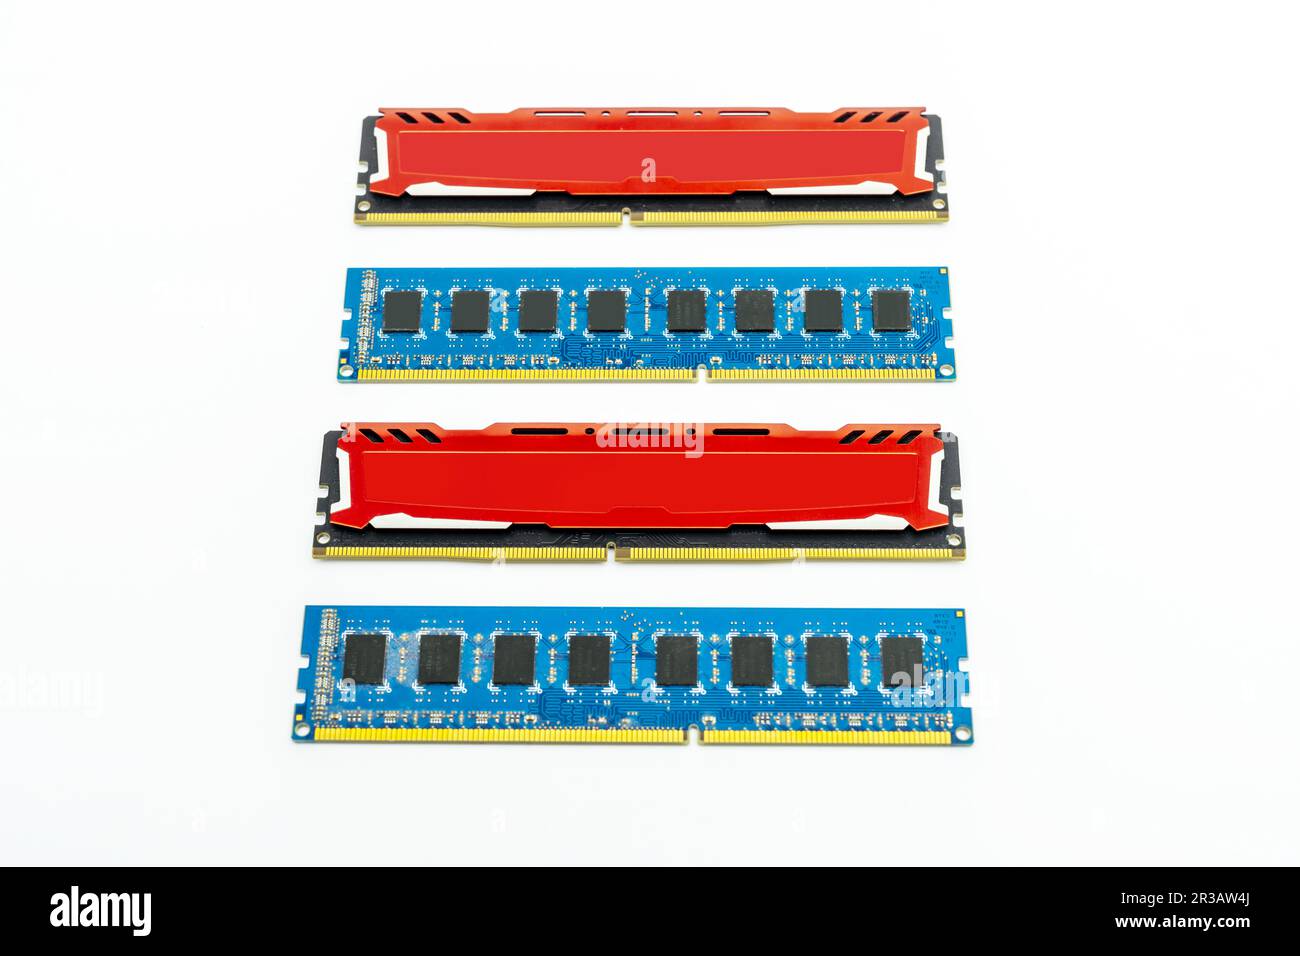 Some ddr3 and ddr4 ram memory modules with heat sink combined on a white surface Stock Photo